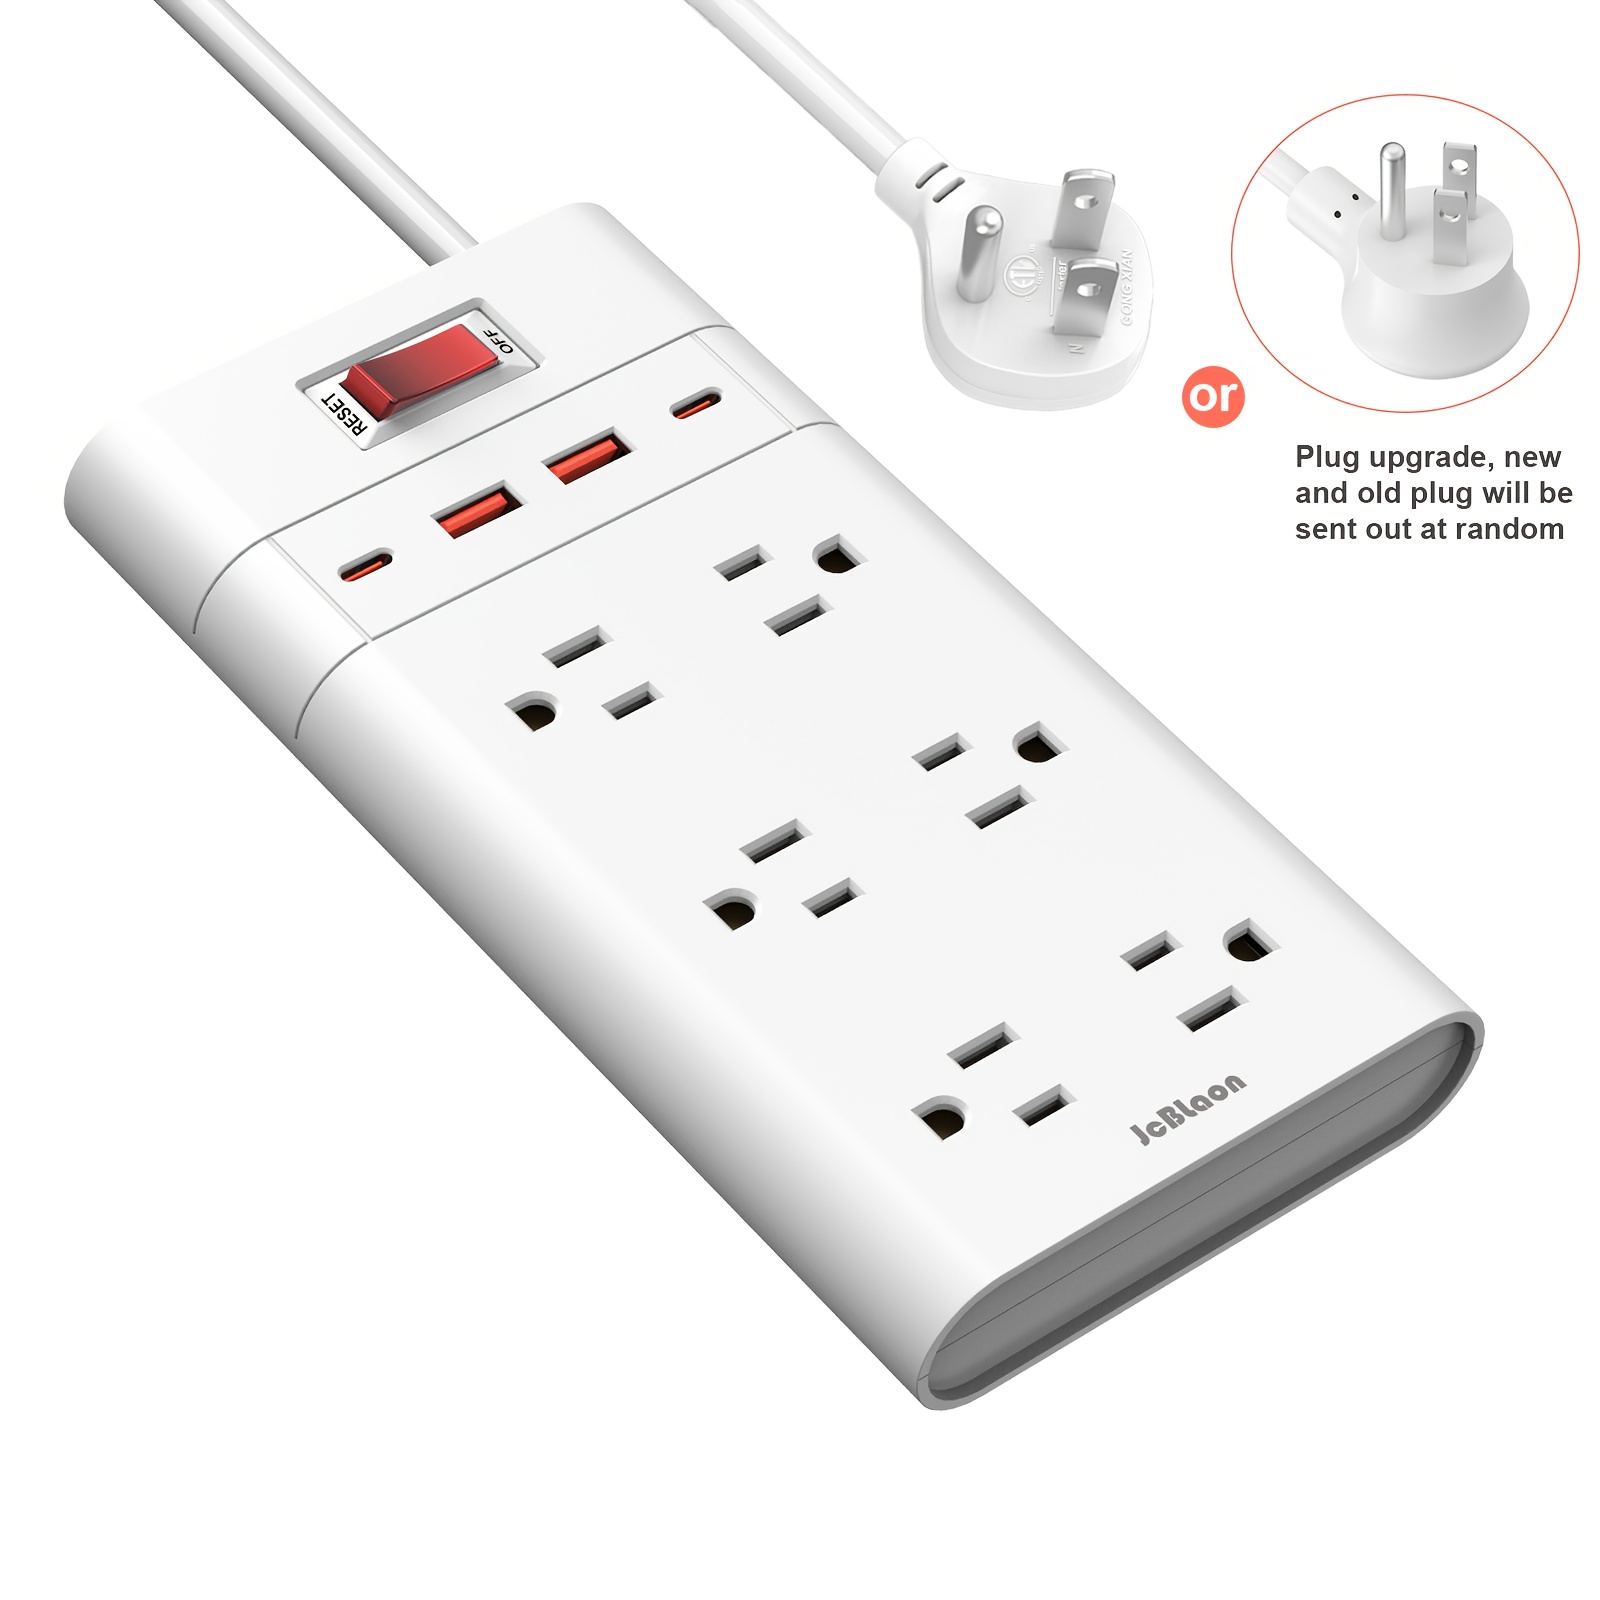 10FT Ultra-Thin Extension Cord,6 Wide-Spaced Outlets 3 USB Ports